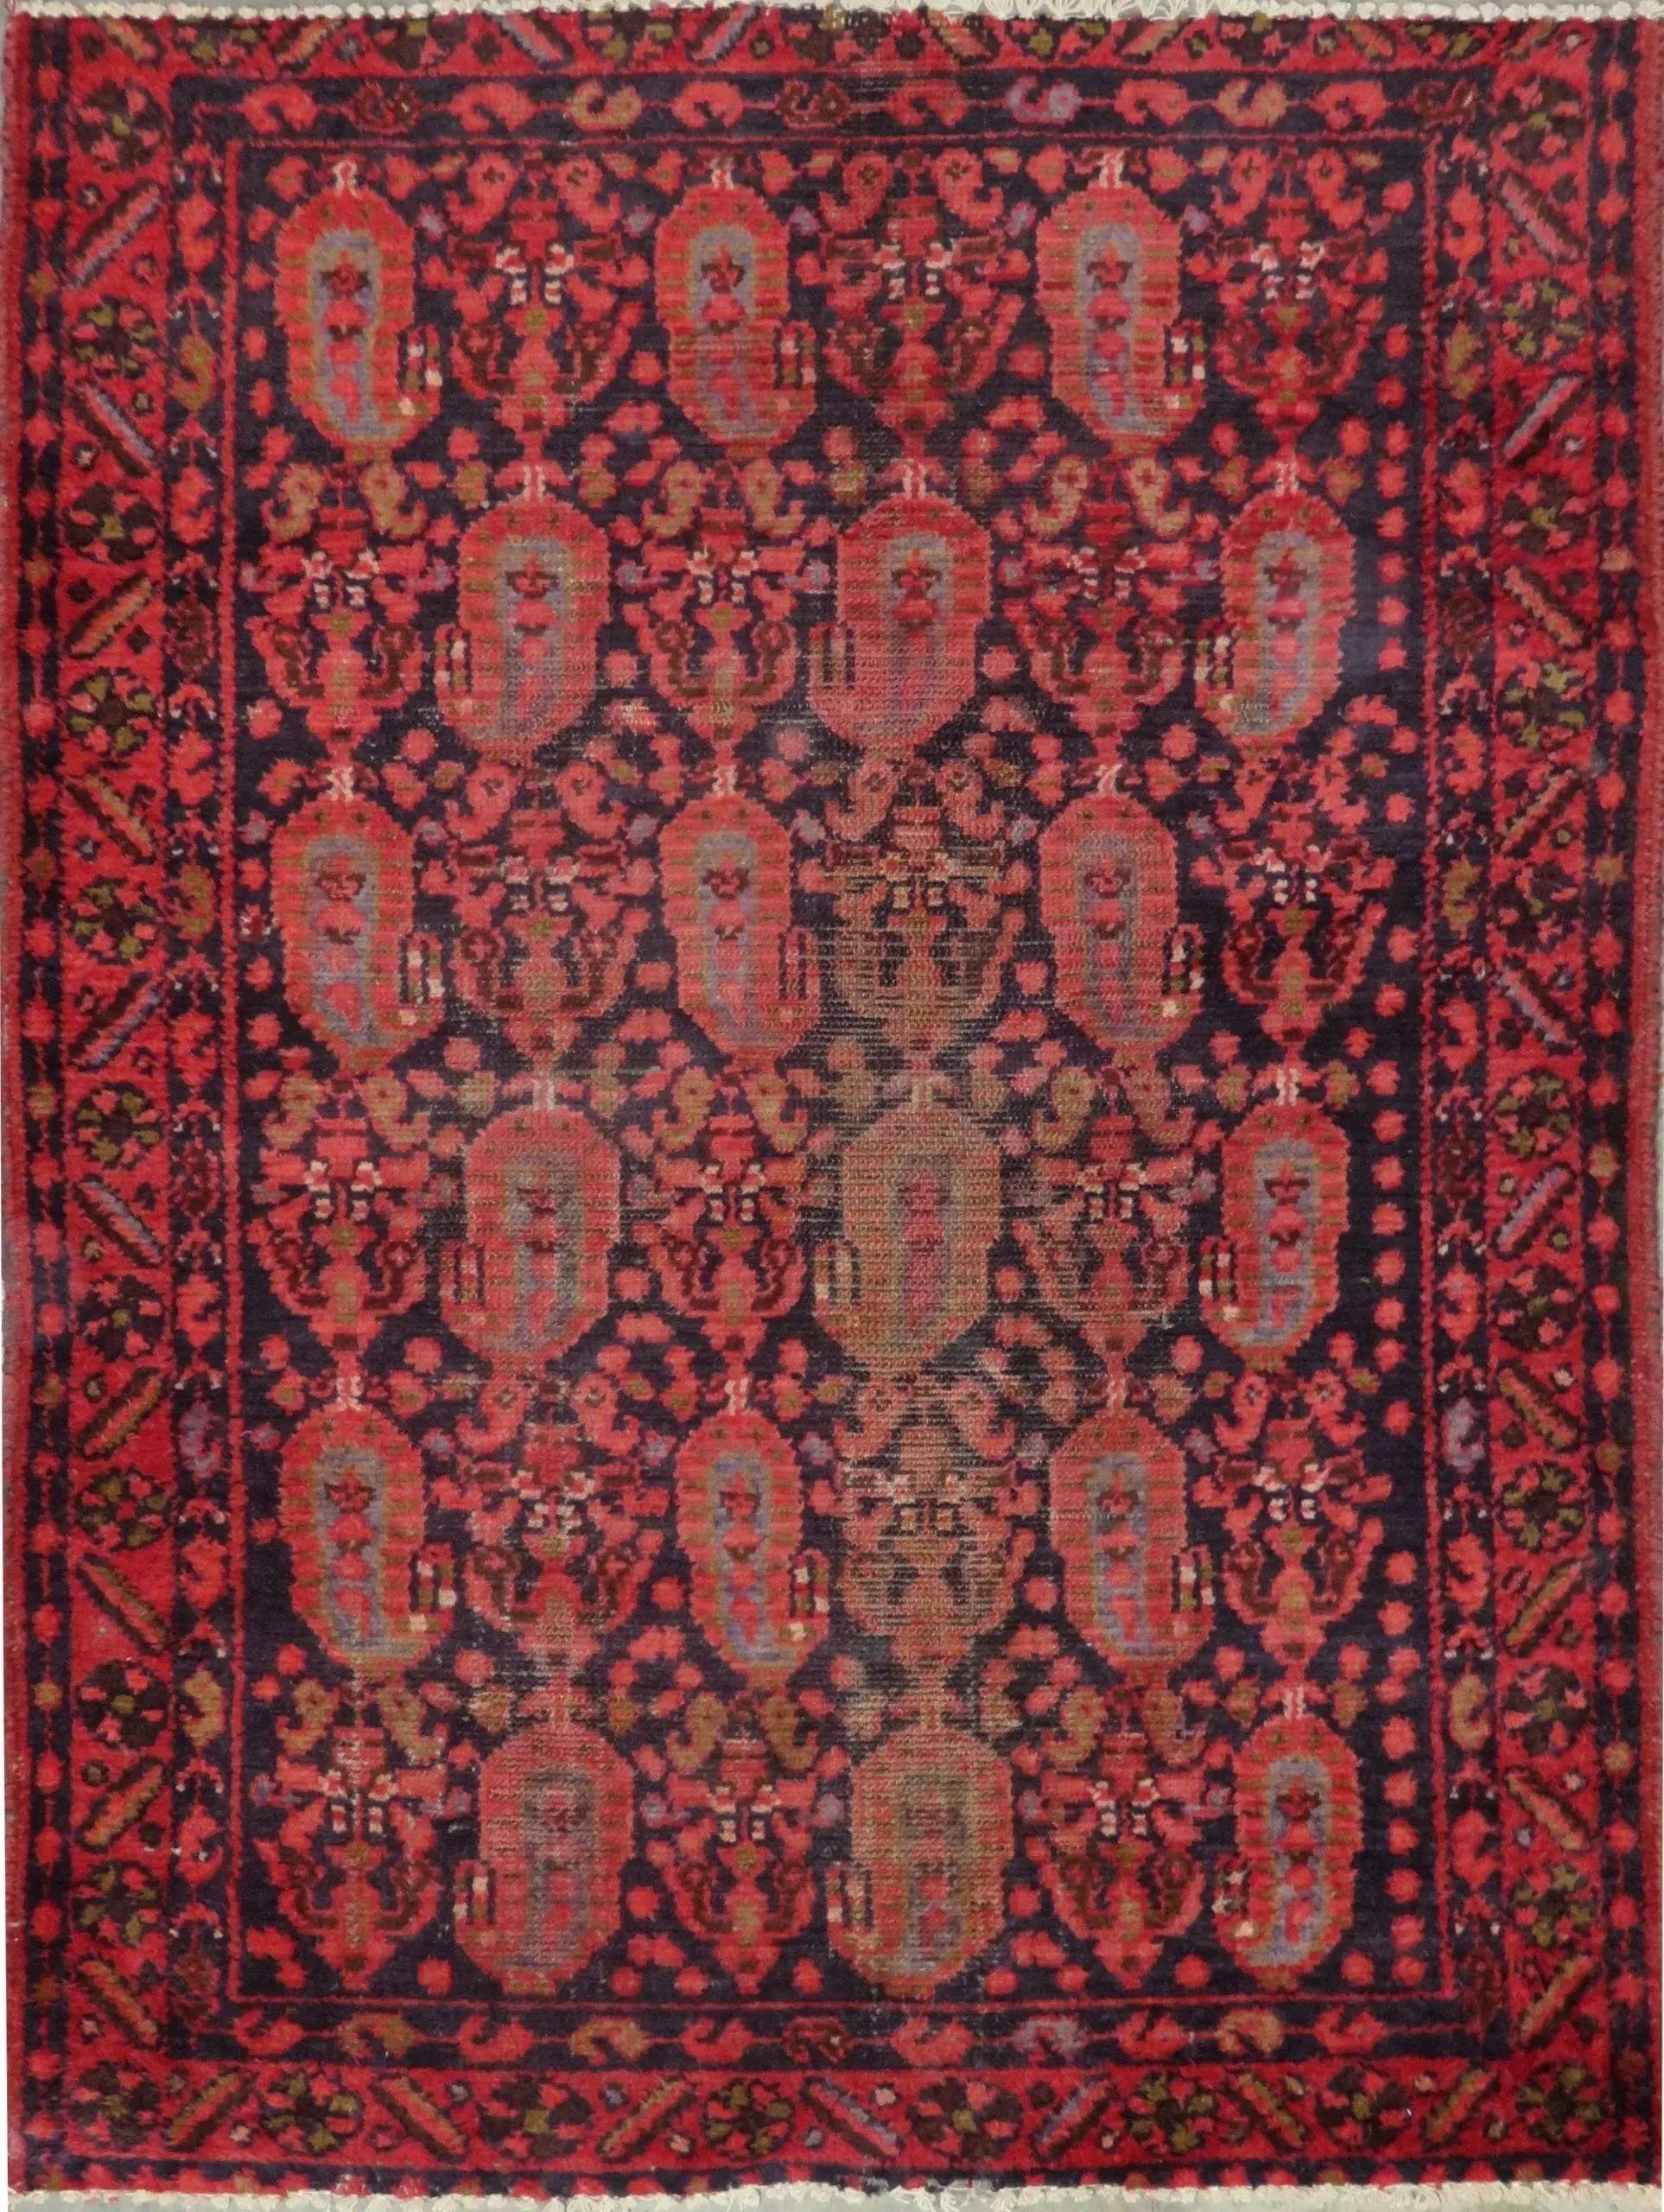 Hand-Knotted Persian Wool Rug _ Luxurious Vintage Design, 4'5" x 3'8", Artisan Crafted